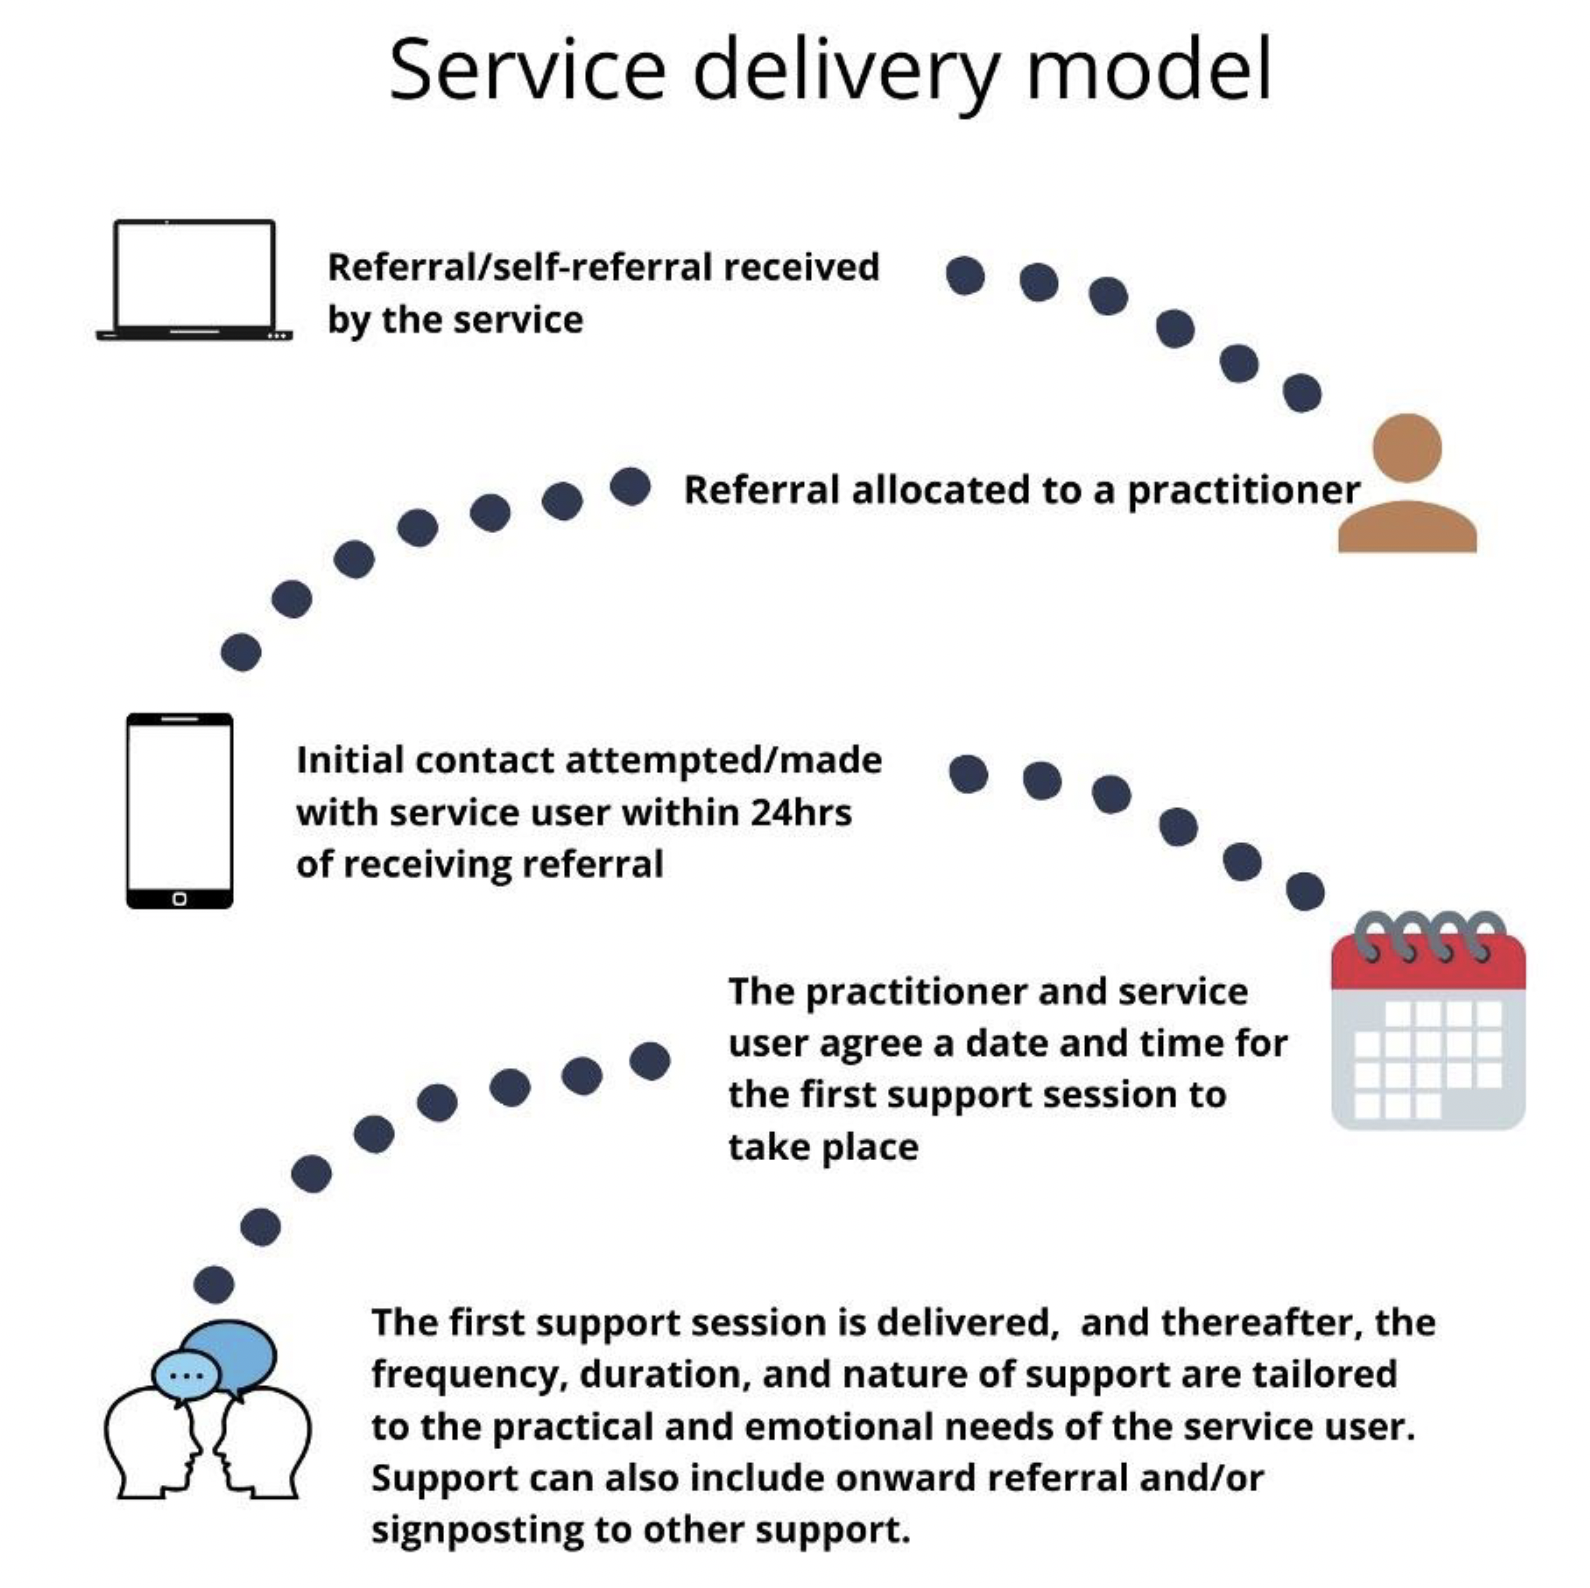 Infographic showing service delivery route form referral and self-referral received by the services to the referral allocated to the a practitioner to initial contact attempted/made with service user within 24hrs of receiving referral to the practitioner and service user agree a time and date for the first support session to take place to the first support session delivered, and thereafter, the frequency, duration, and nature of support are tailored to the practical and emotional needs of the service user. Support can also include onward referral and/or signposting to other support.